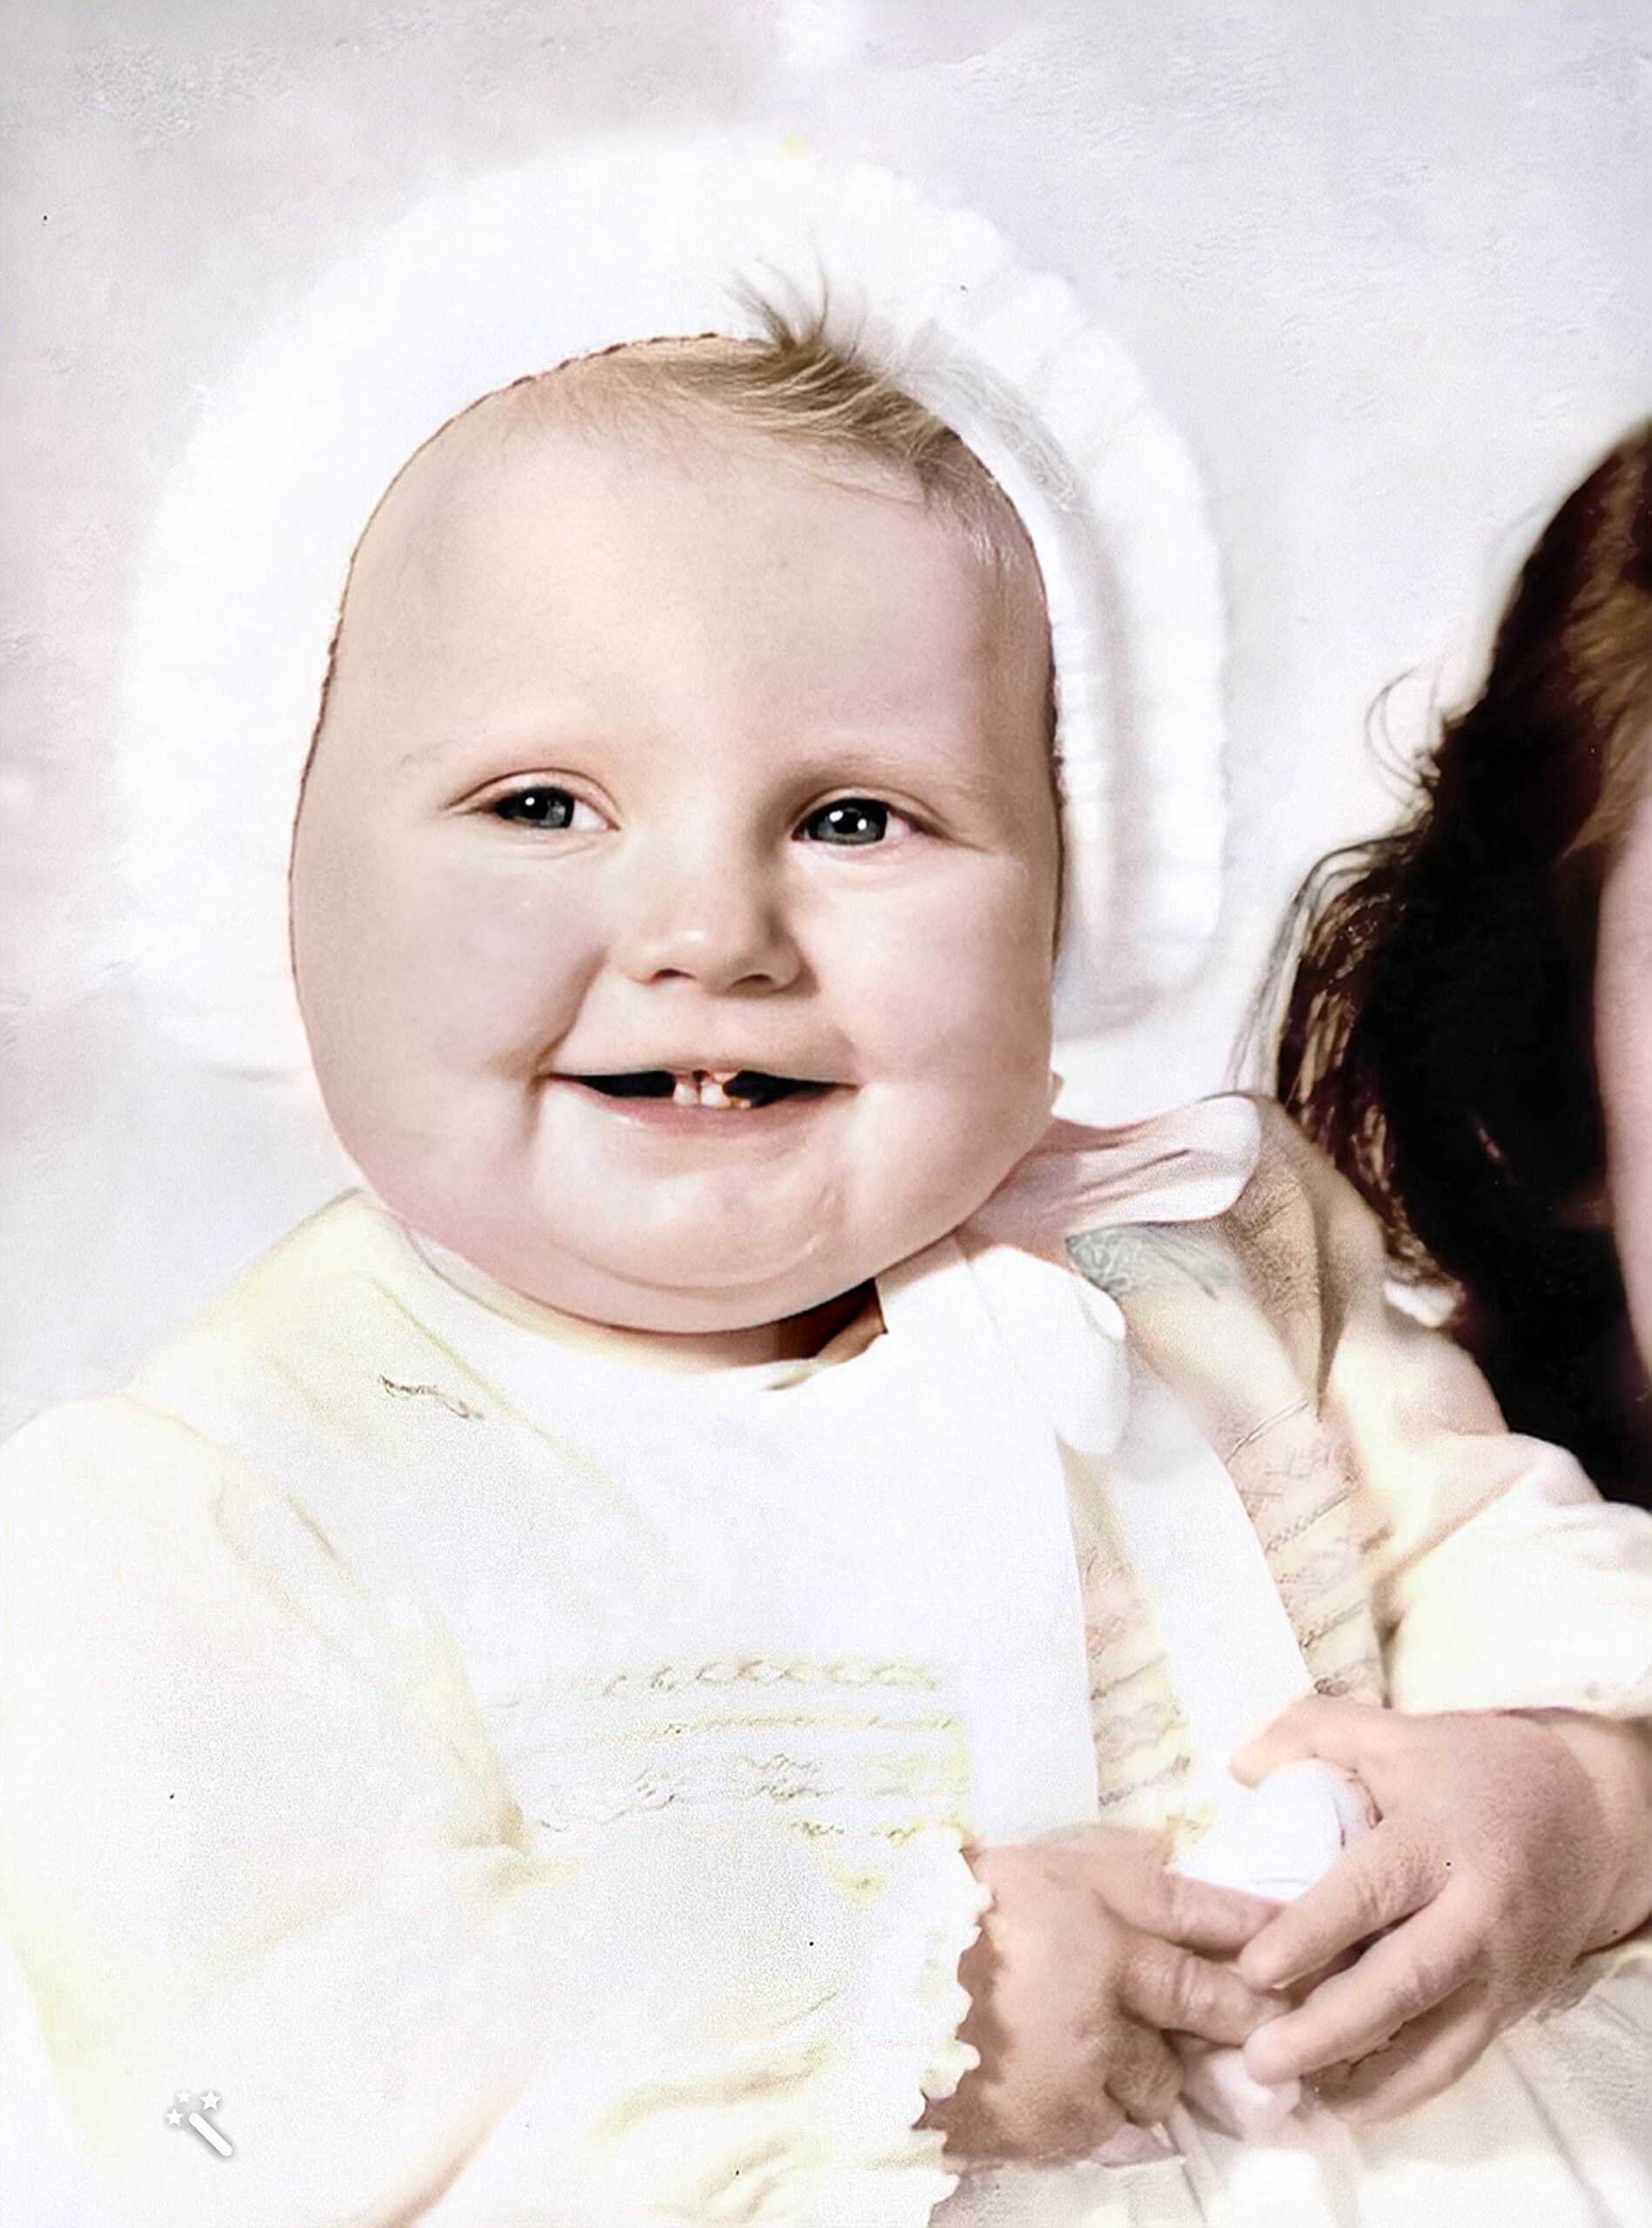 Suzy as a baby. Photo repaired, enhanced, and color-restored by MyHeritage